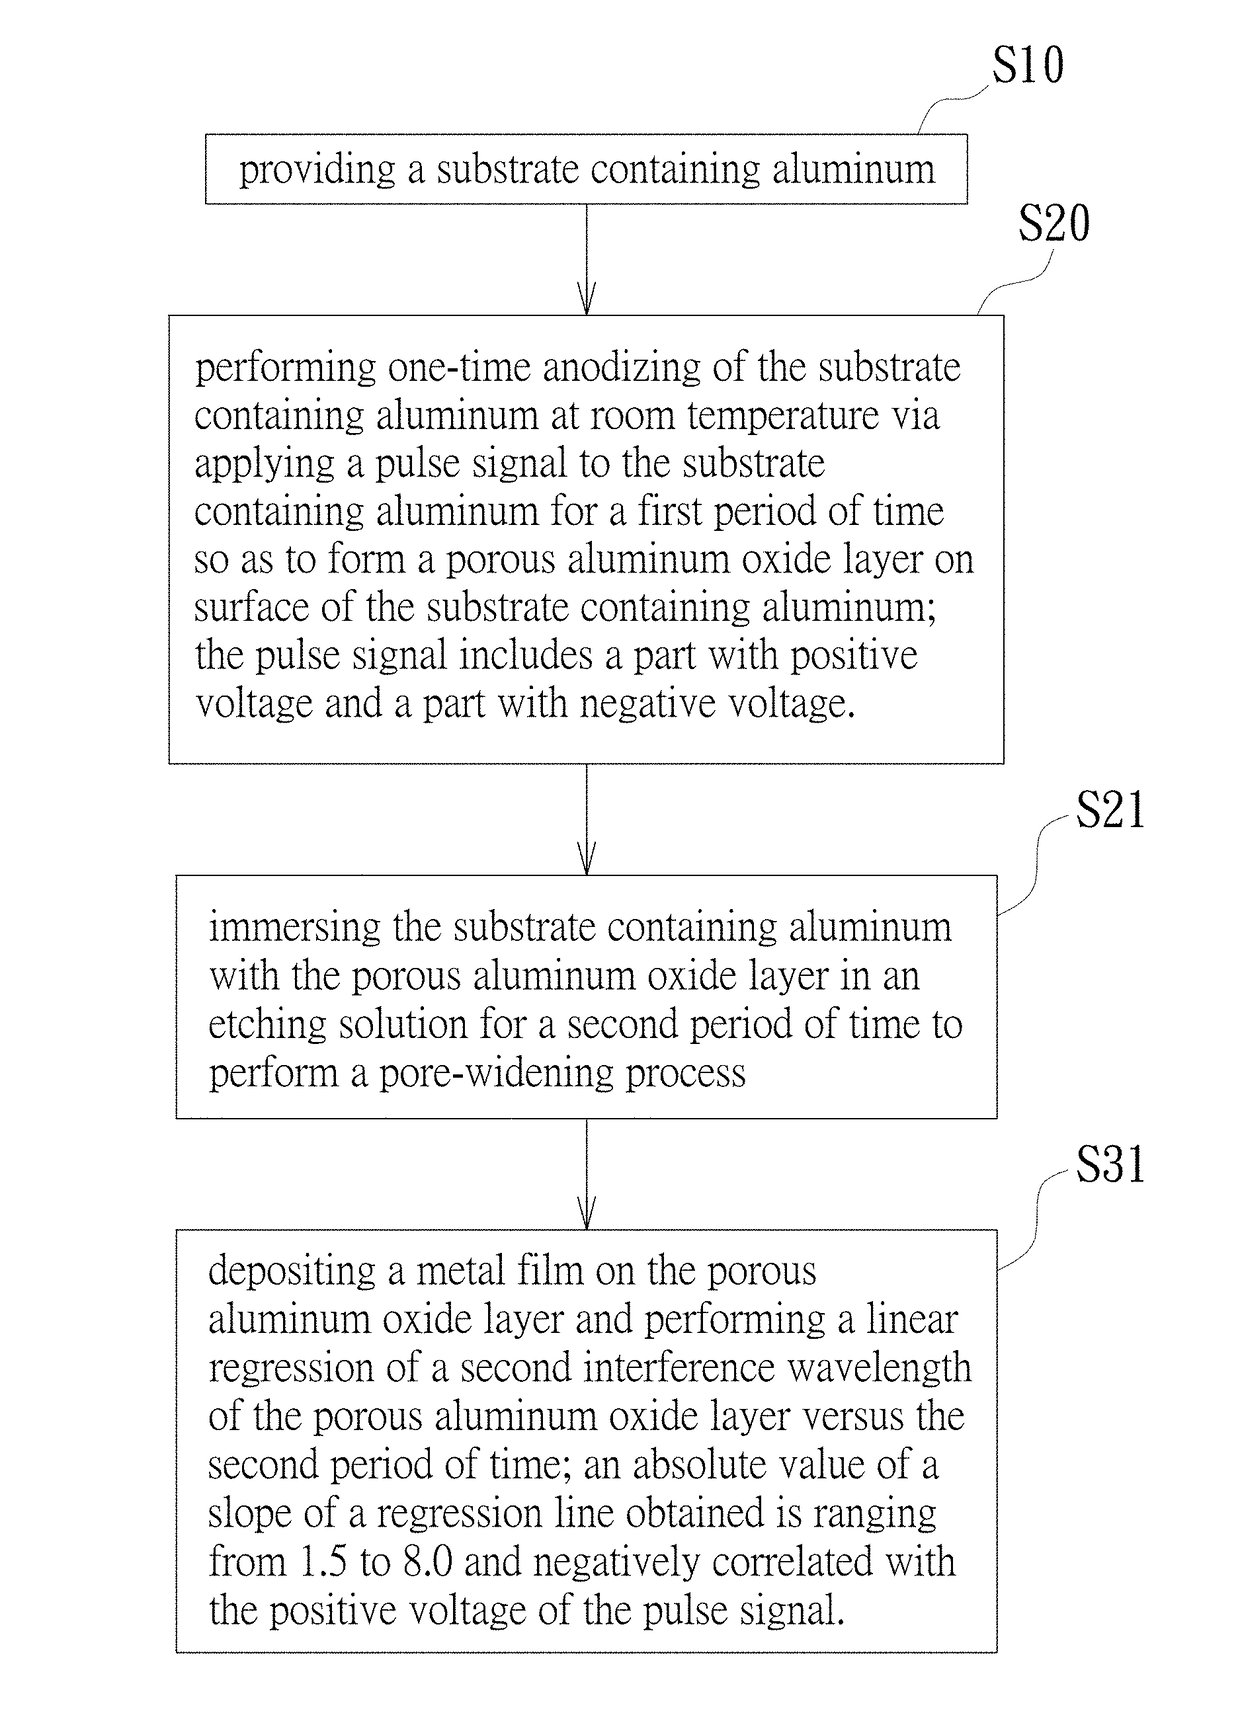 Method for dye-free coloring of one-time anodic aluminum oxide surface